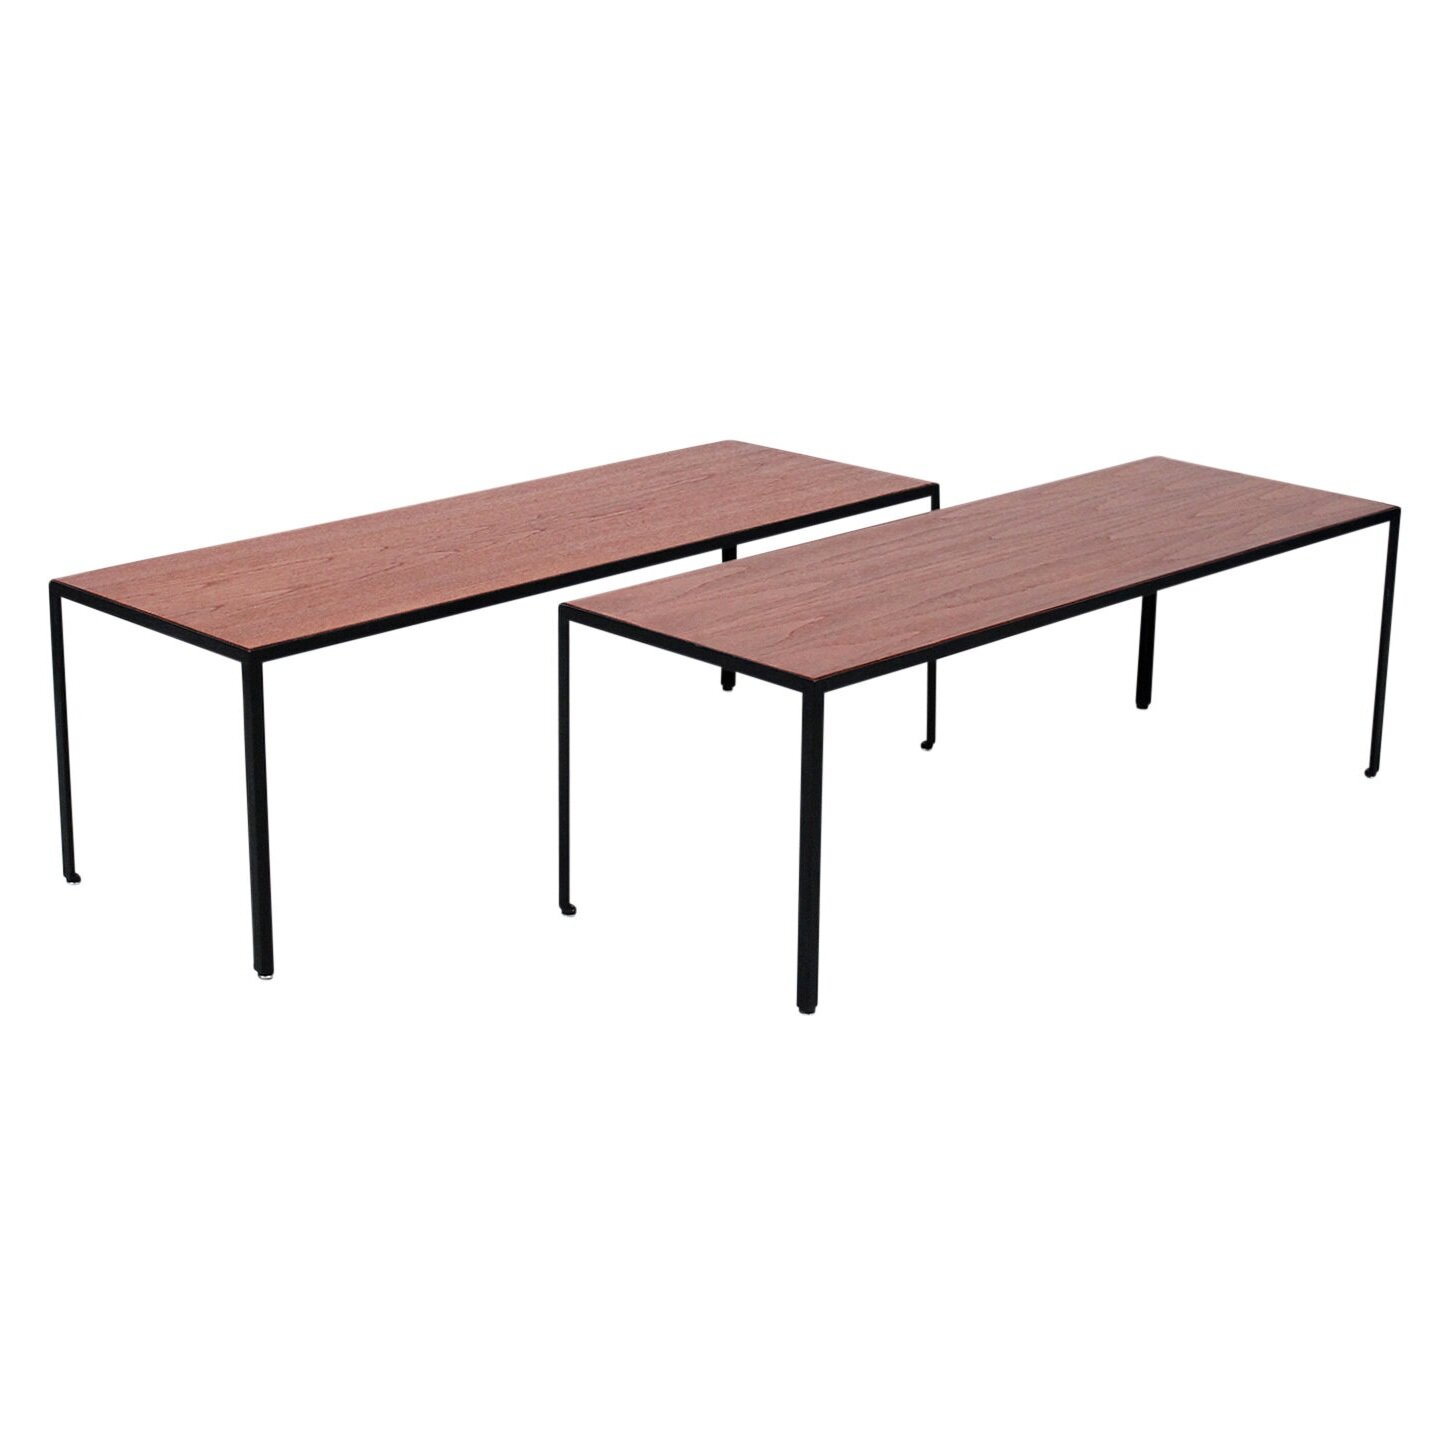 Pair of Angle Iron Tables by George Nelson (Copy)